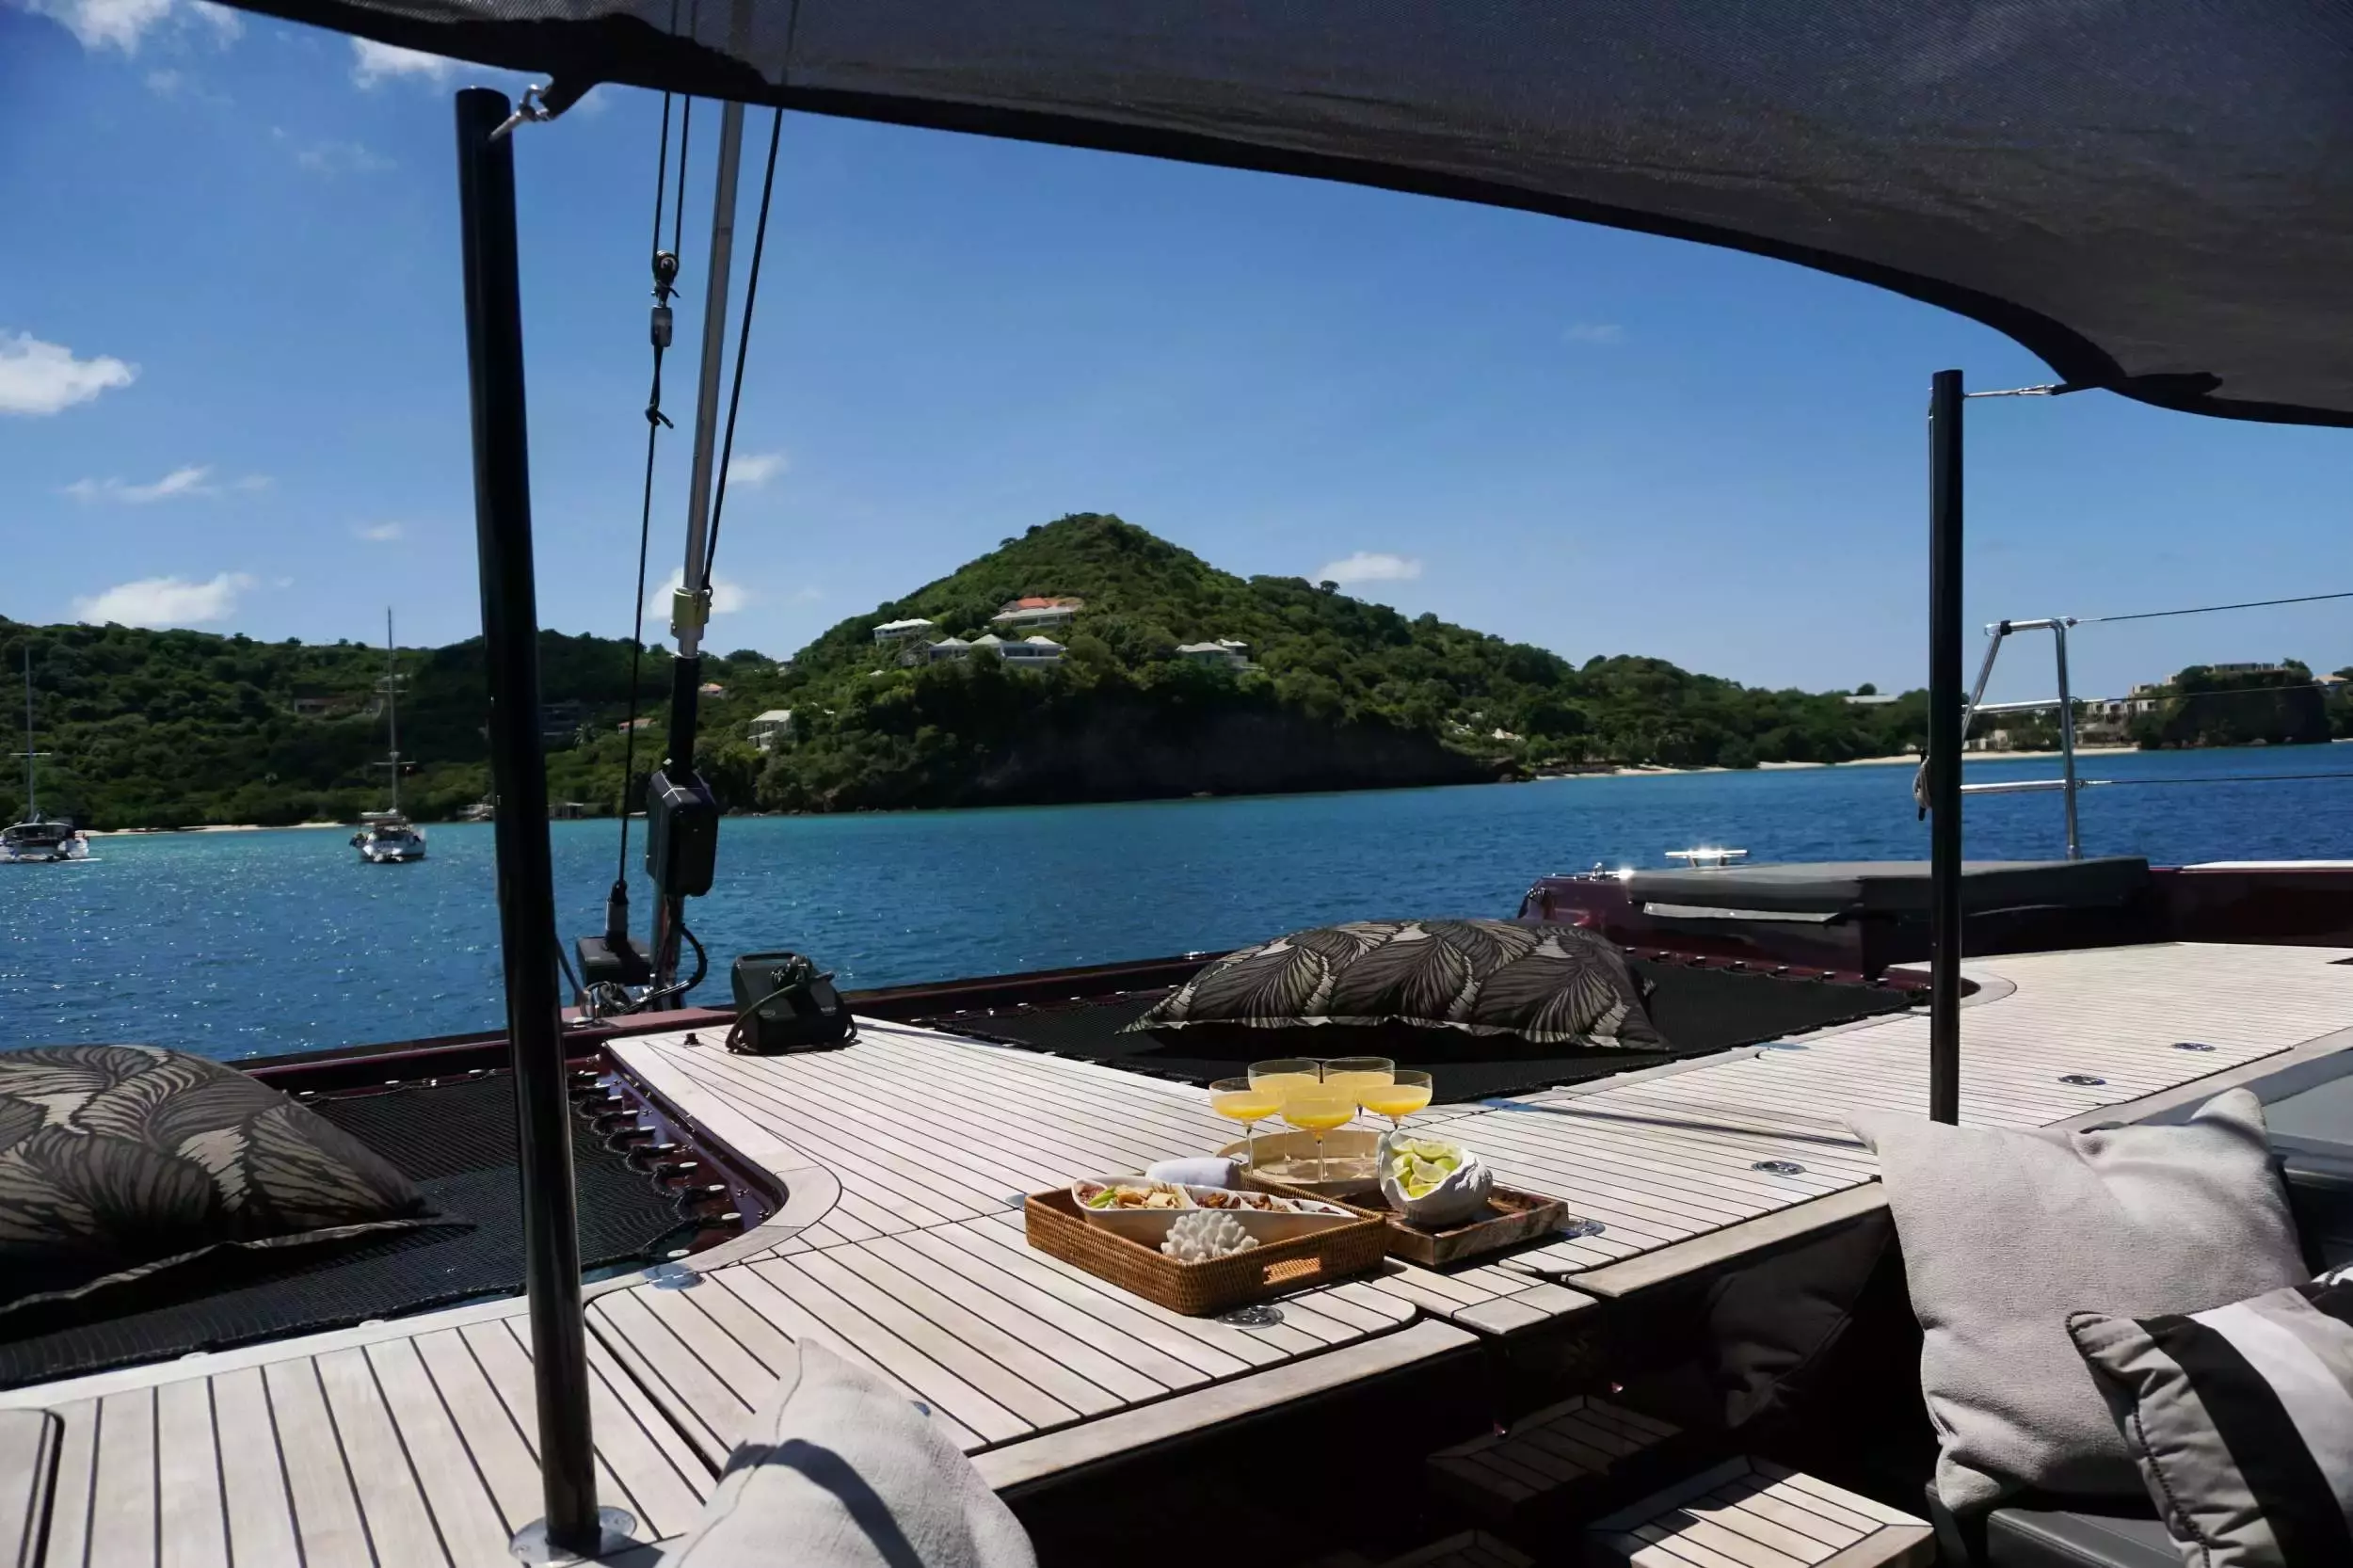 Lena by Sunreef Yachts - Special Offer for a private Luxury Catamaran Charter in Virgin Gorda with a crew